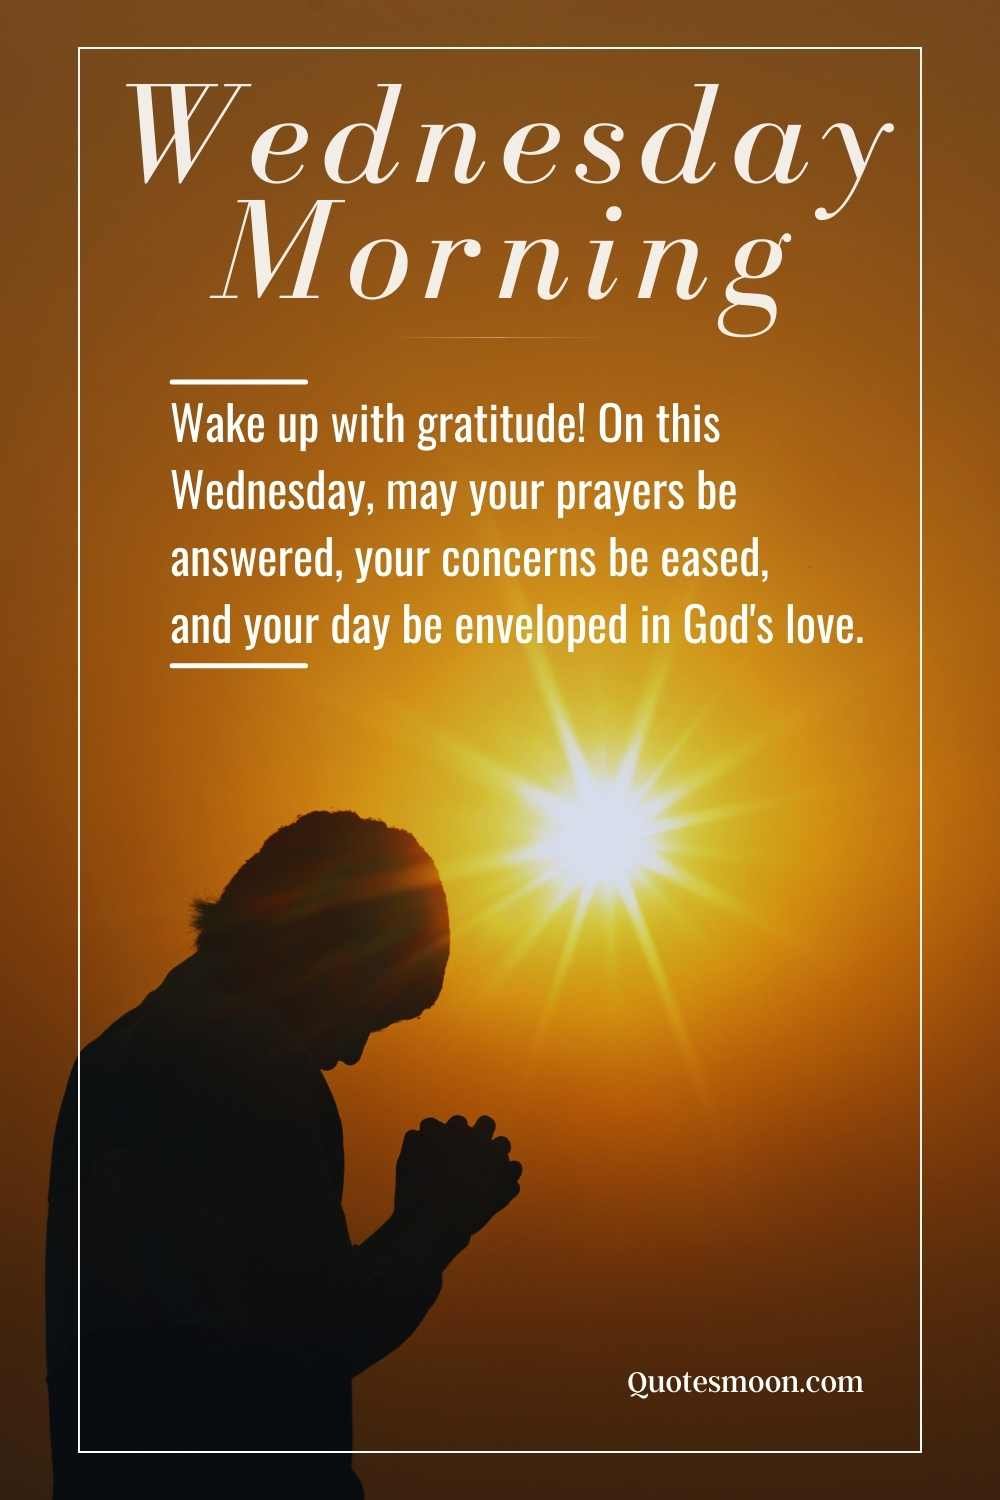 Inspiring Wednesday Morning Blessings with images